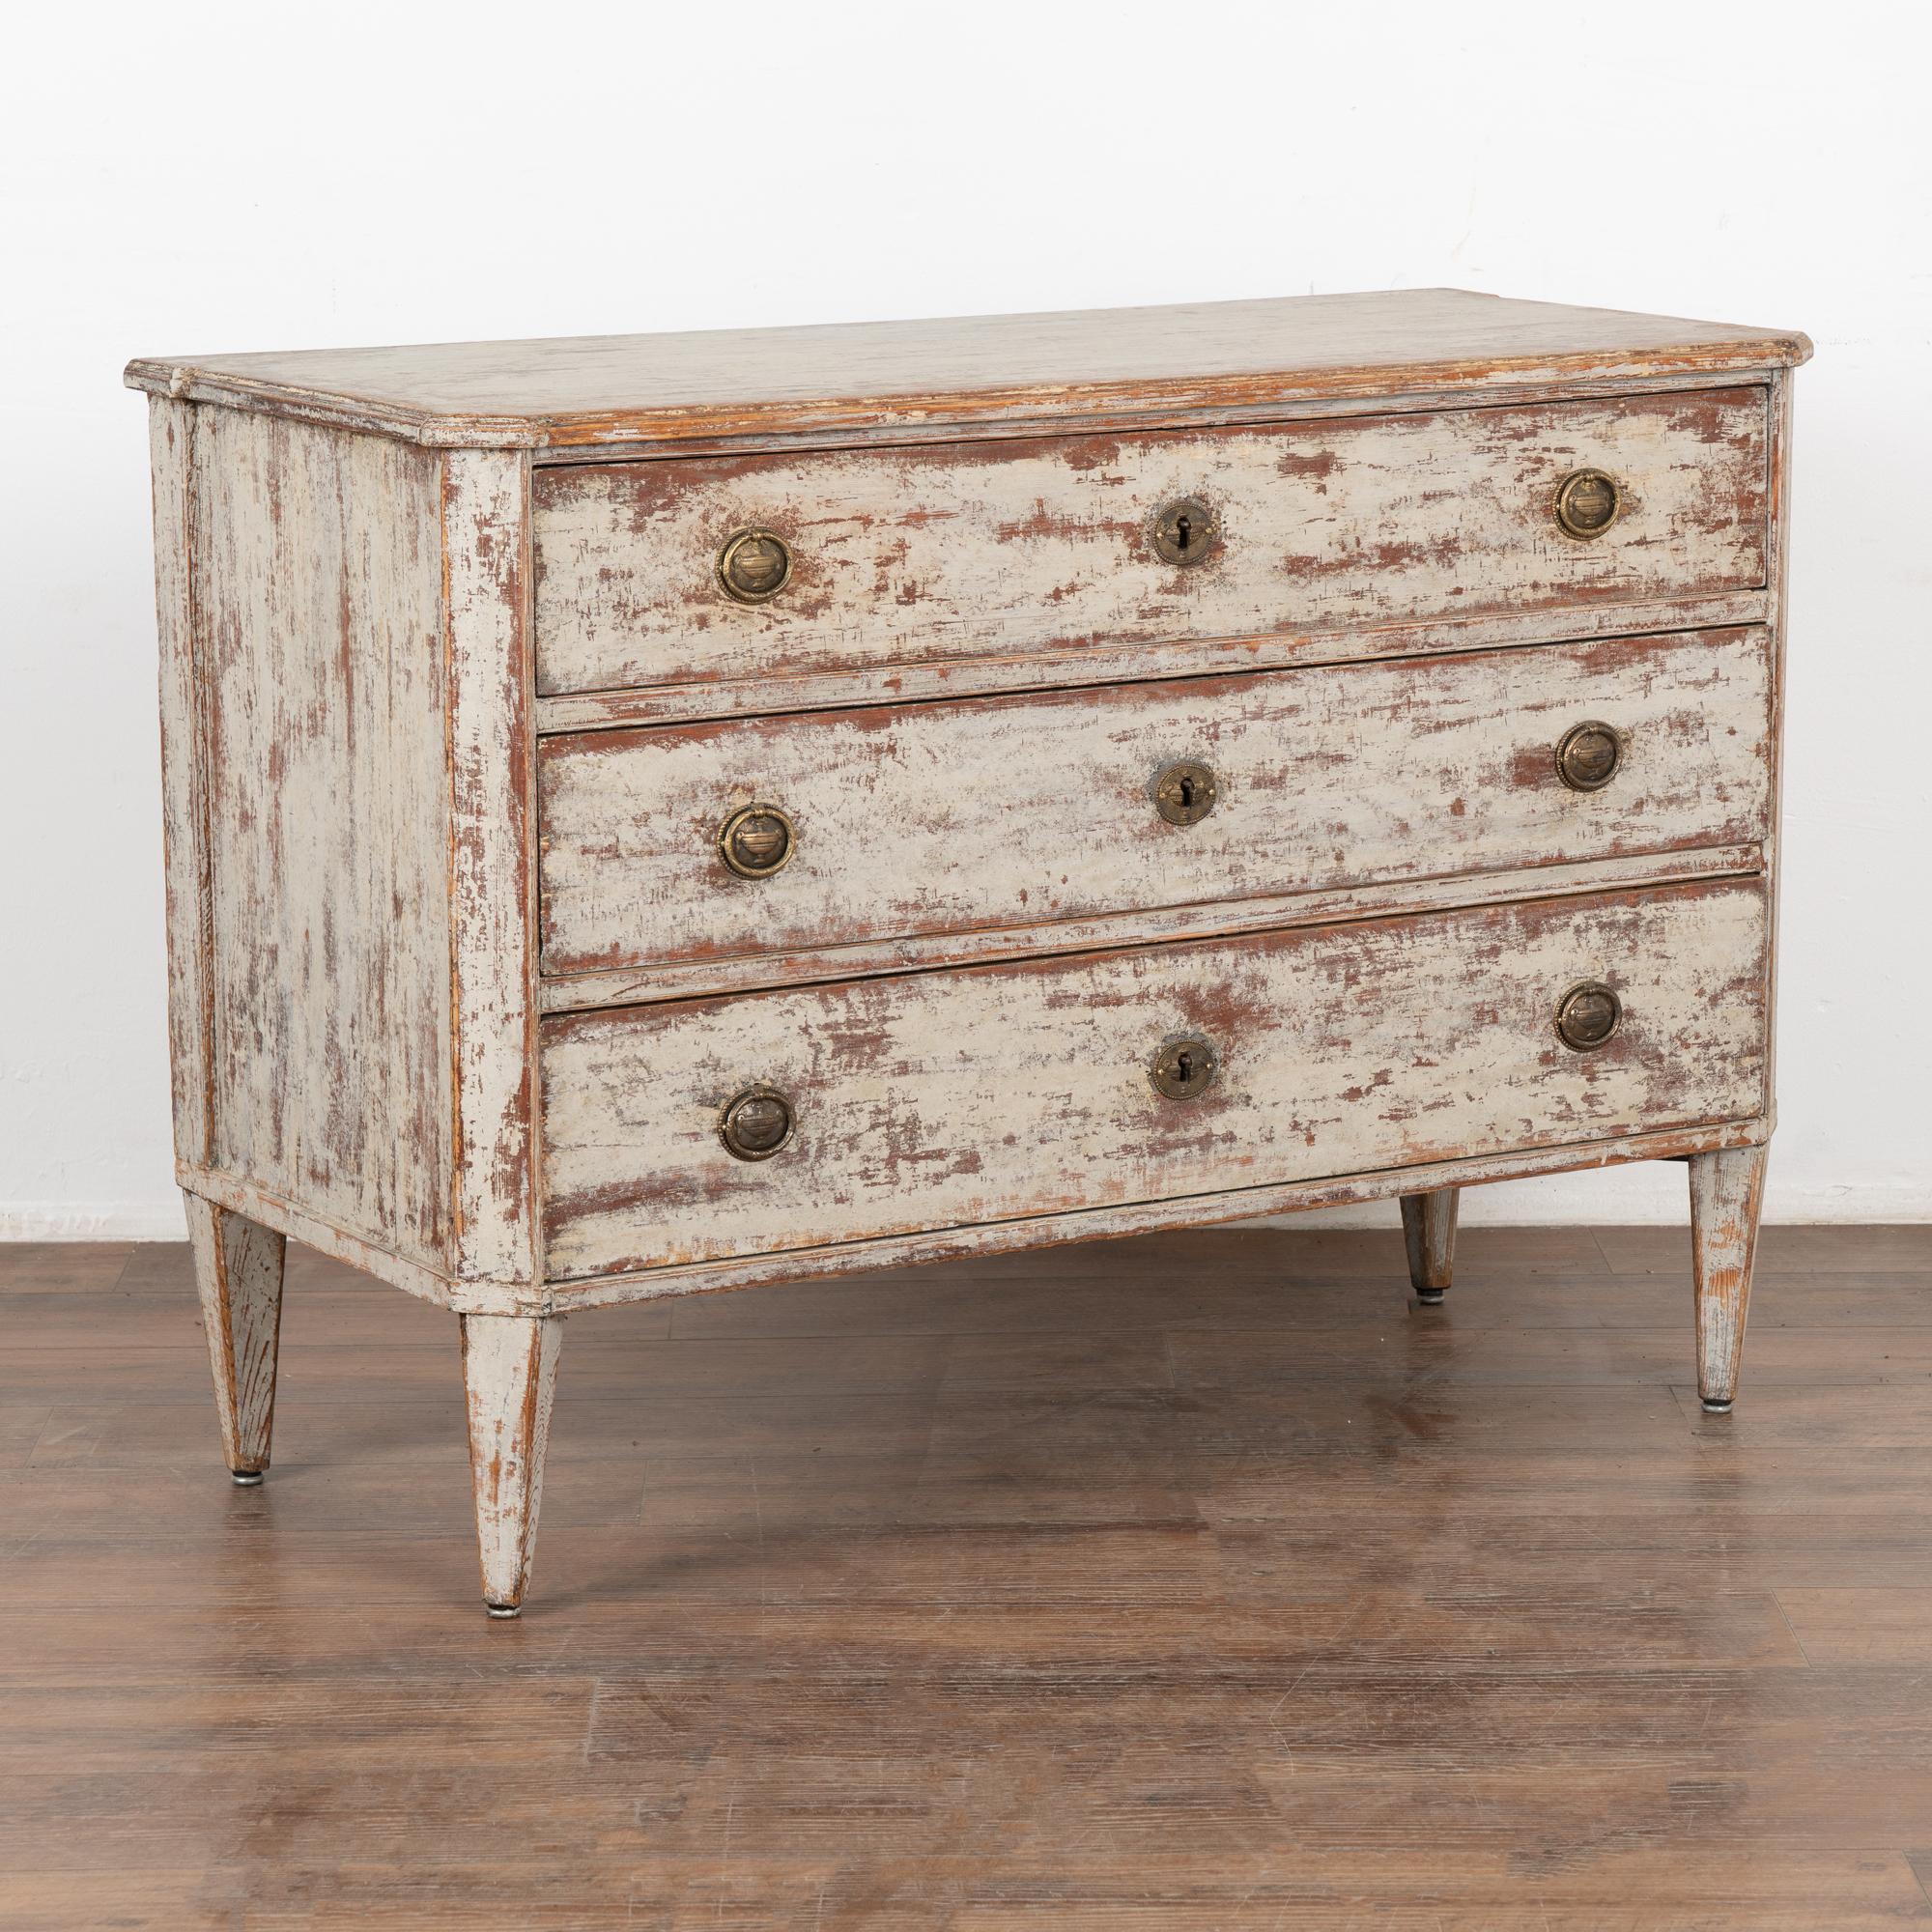 The simple lines of this charming pine chest of three drawers with canted sides and tapered feet are reflective of its Swedish country styling. 
The newer, professionally applied layered antique white painted finish with brick red and gray